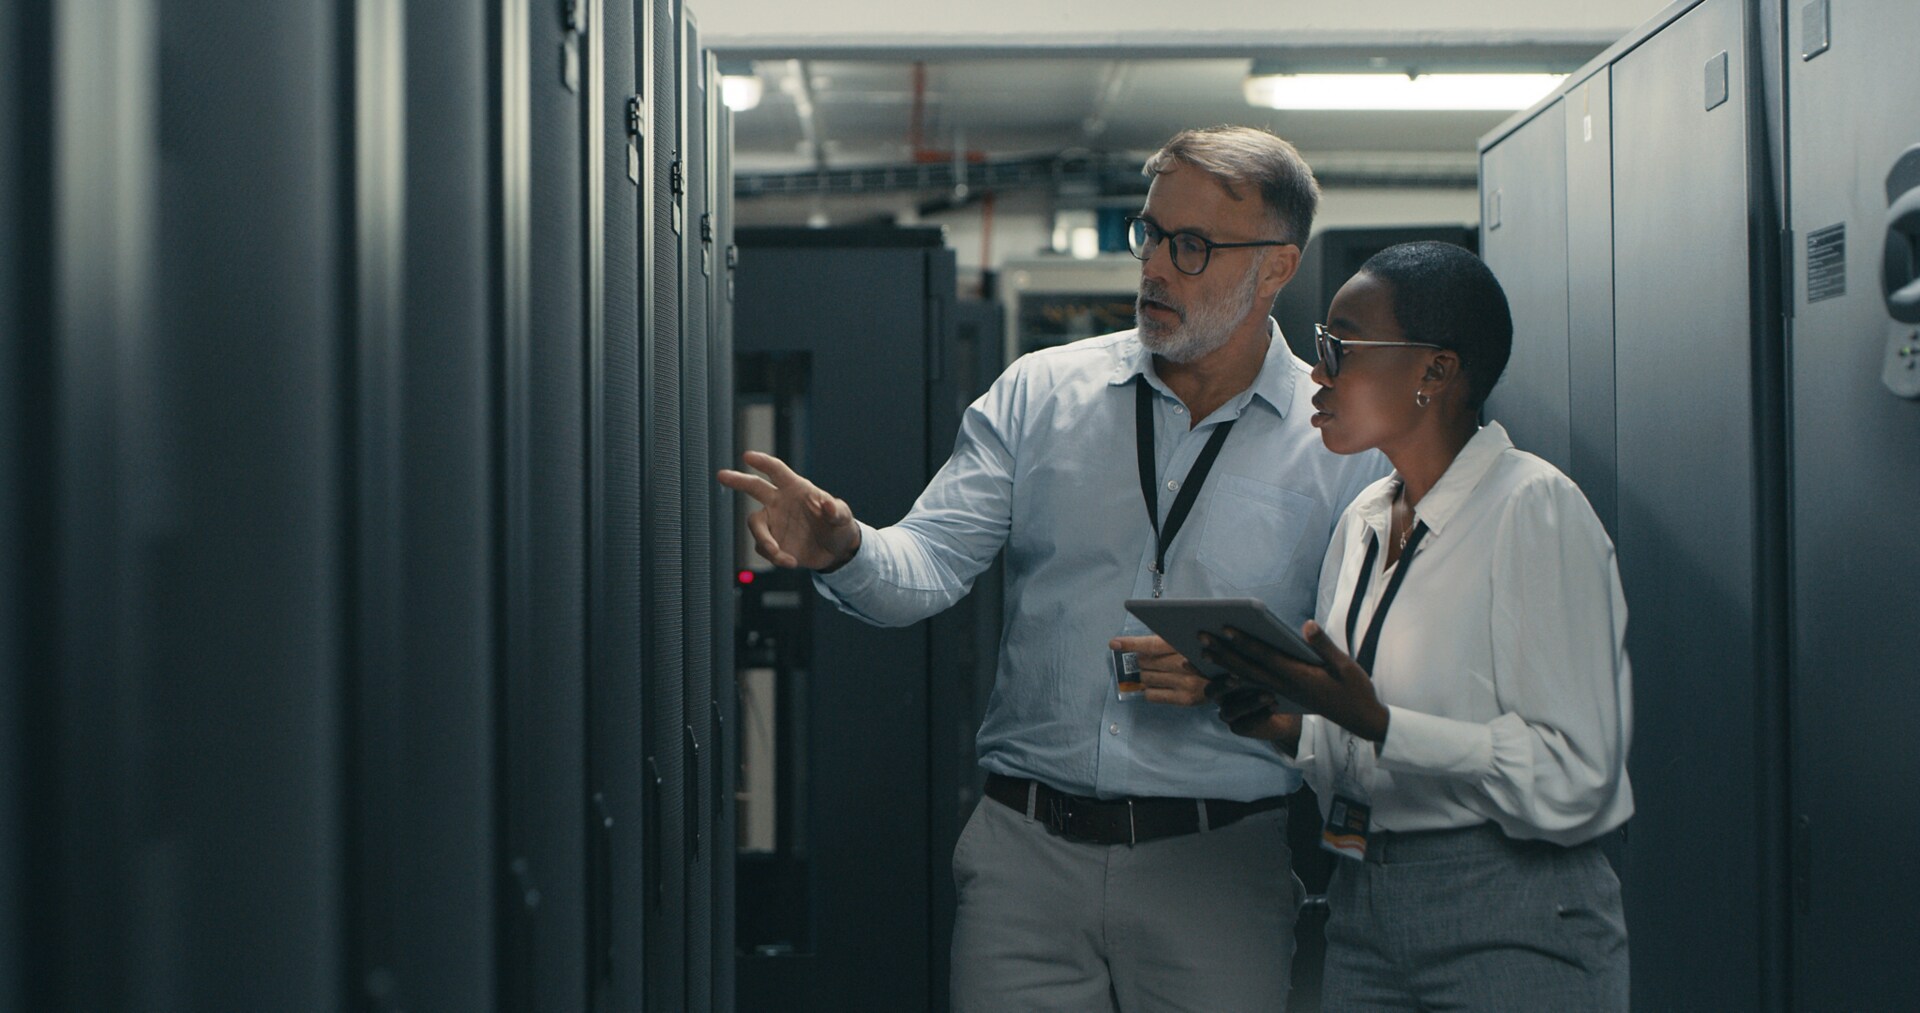 Two people standing next a sever rack discussing about something.